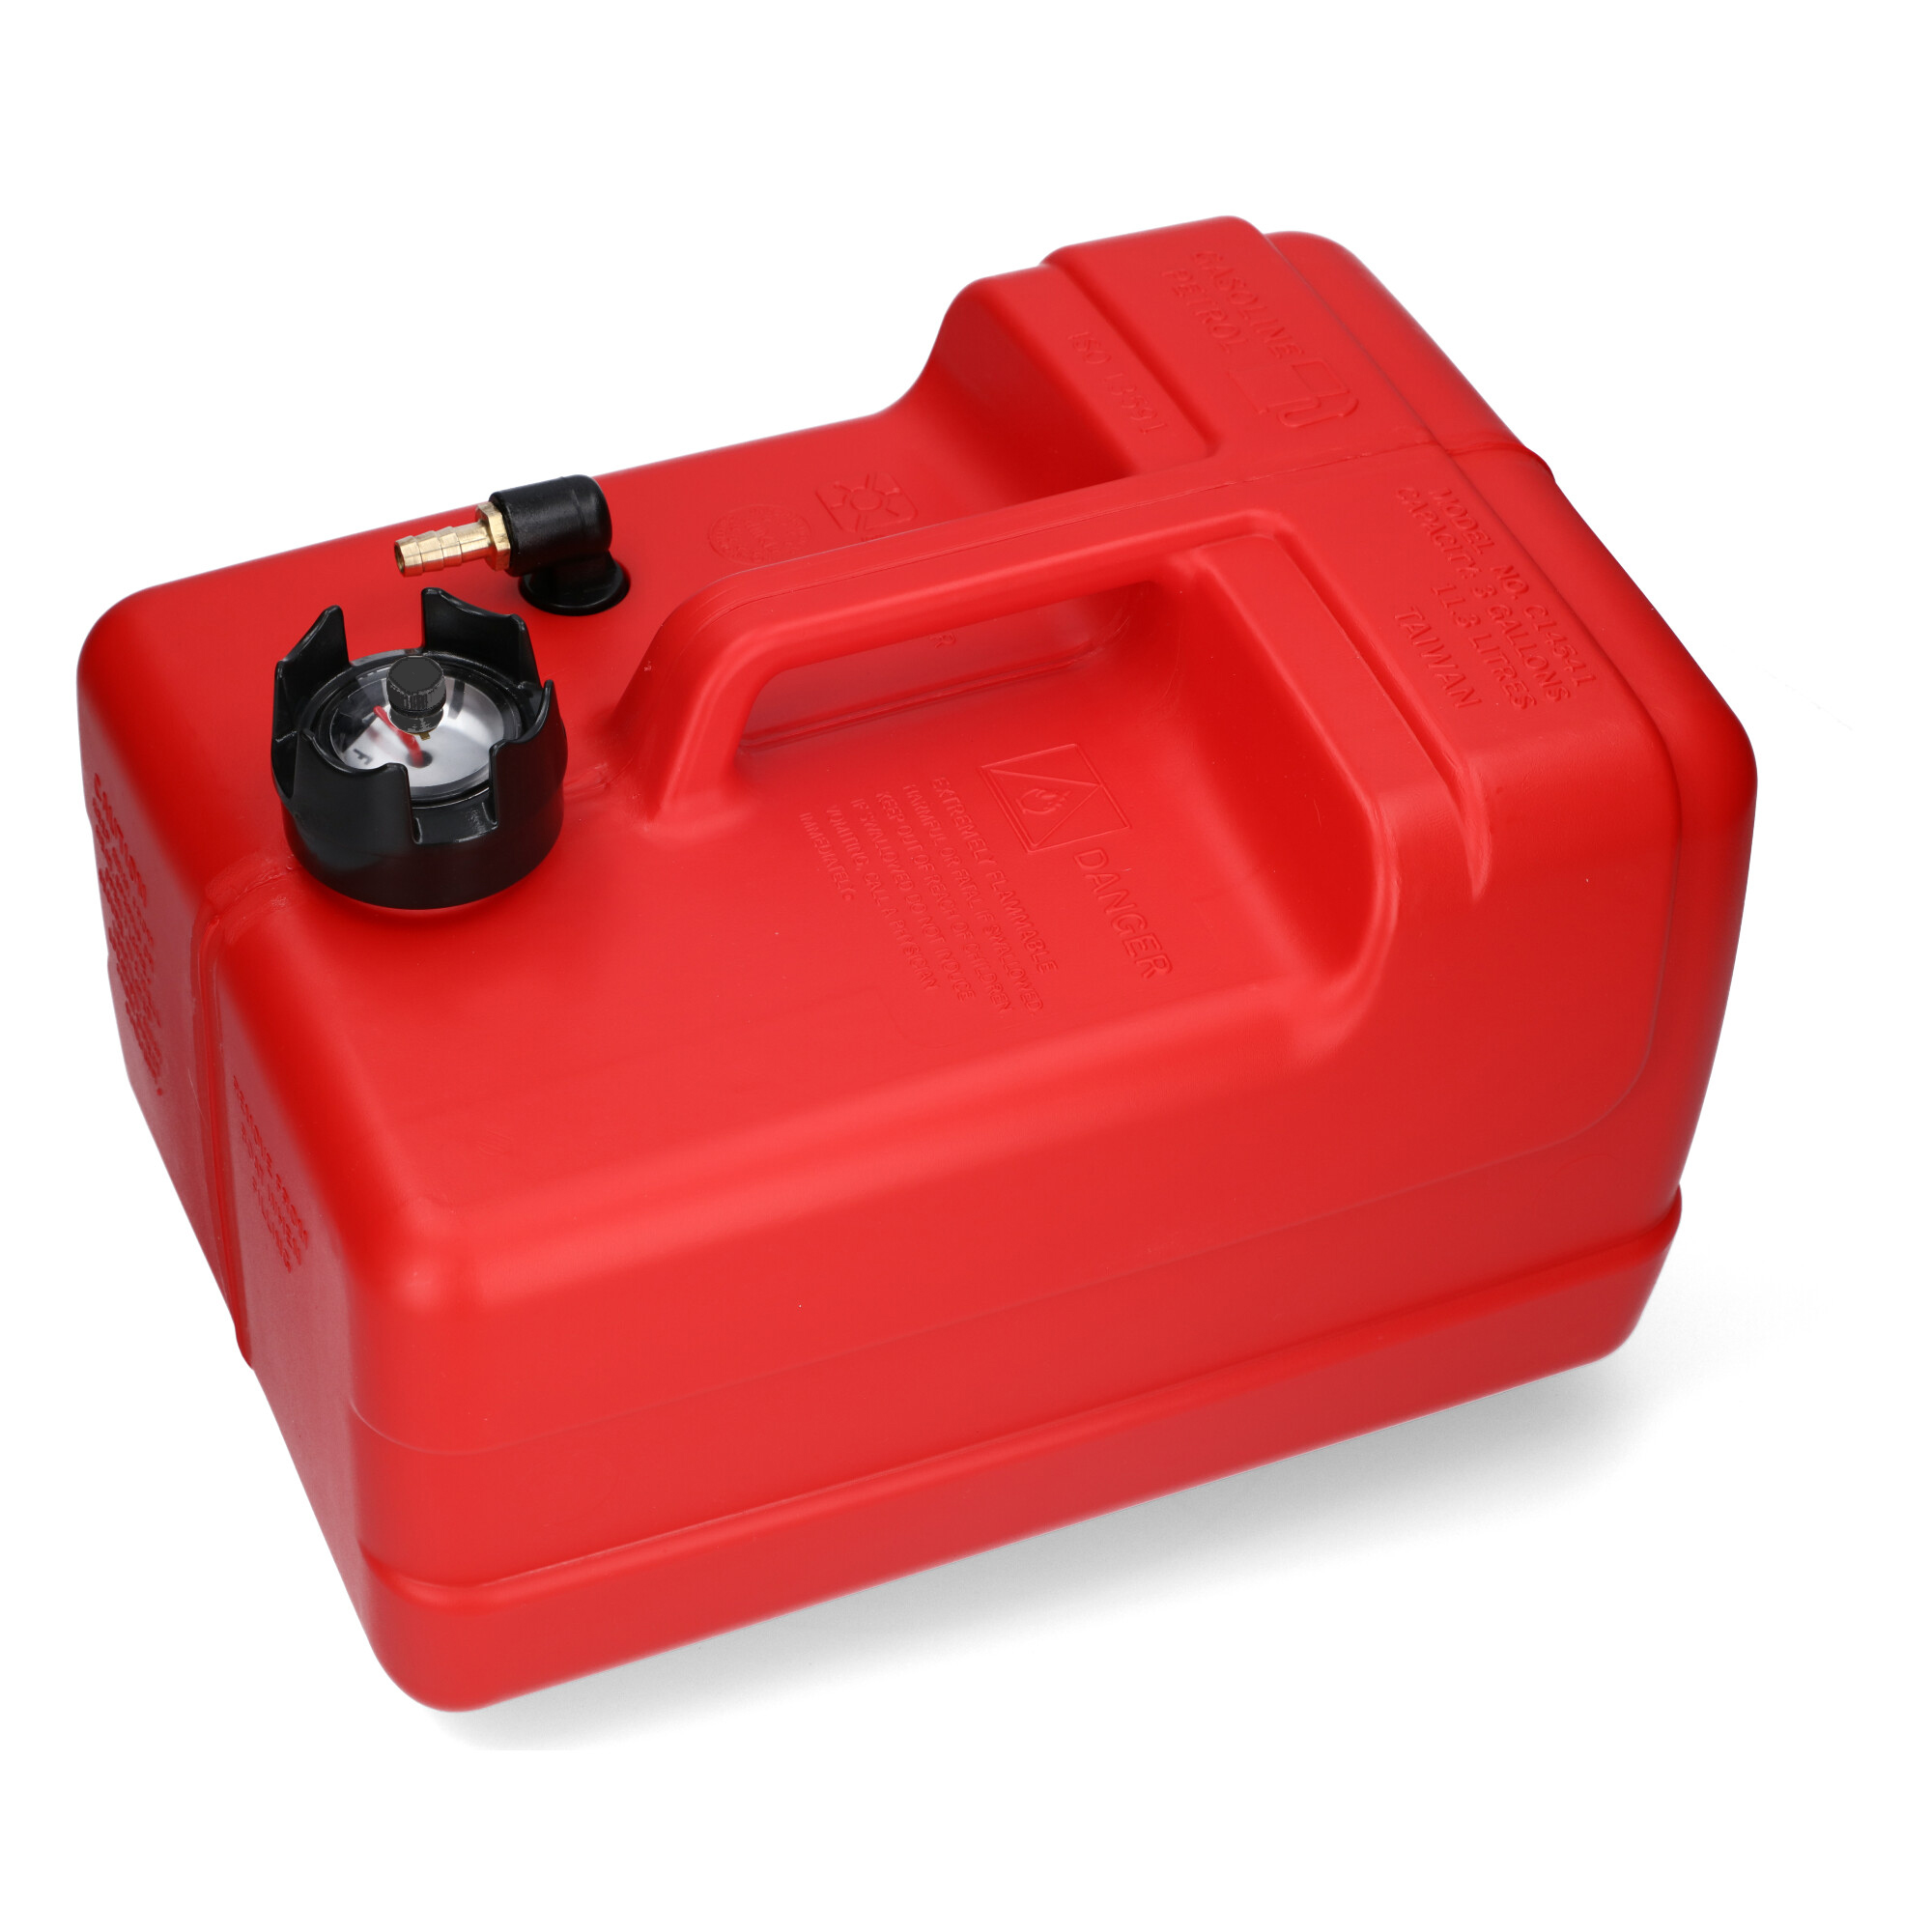 Fuel tank red with nipple (10mm) connection / level indicator manual